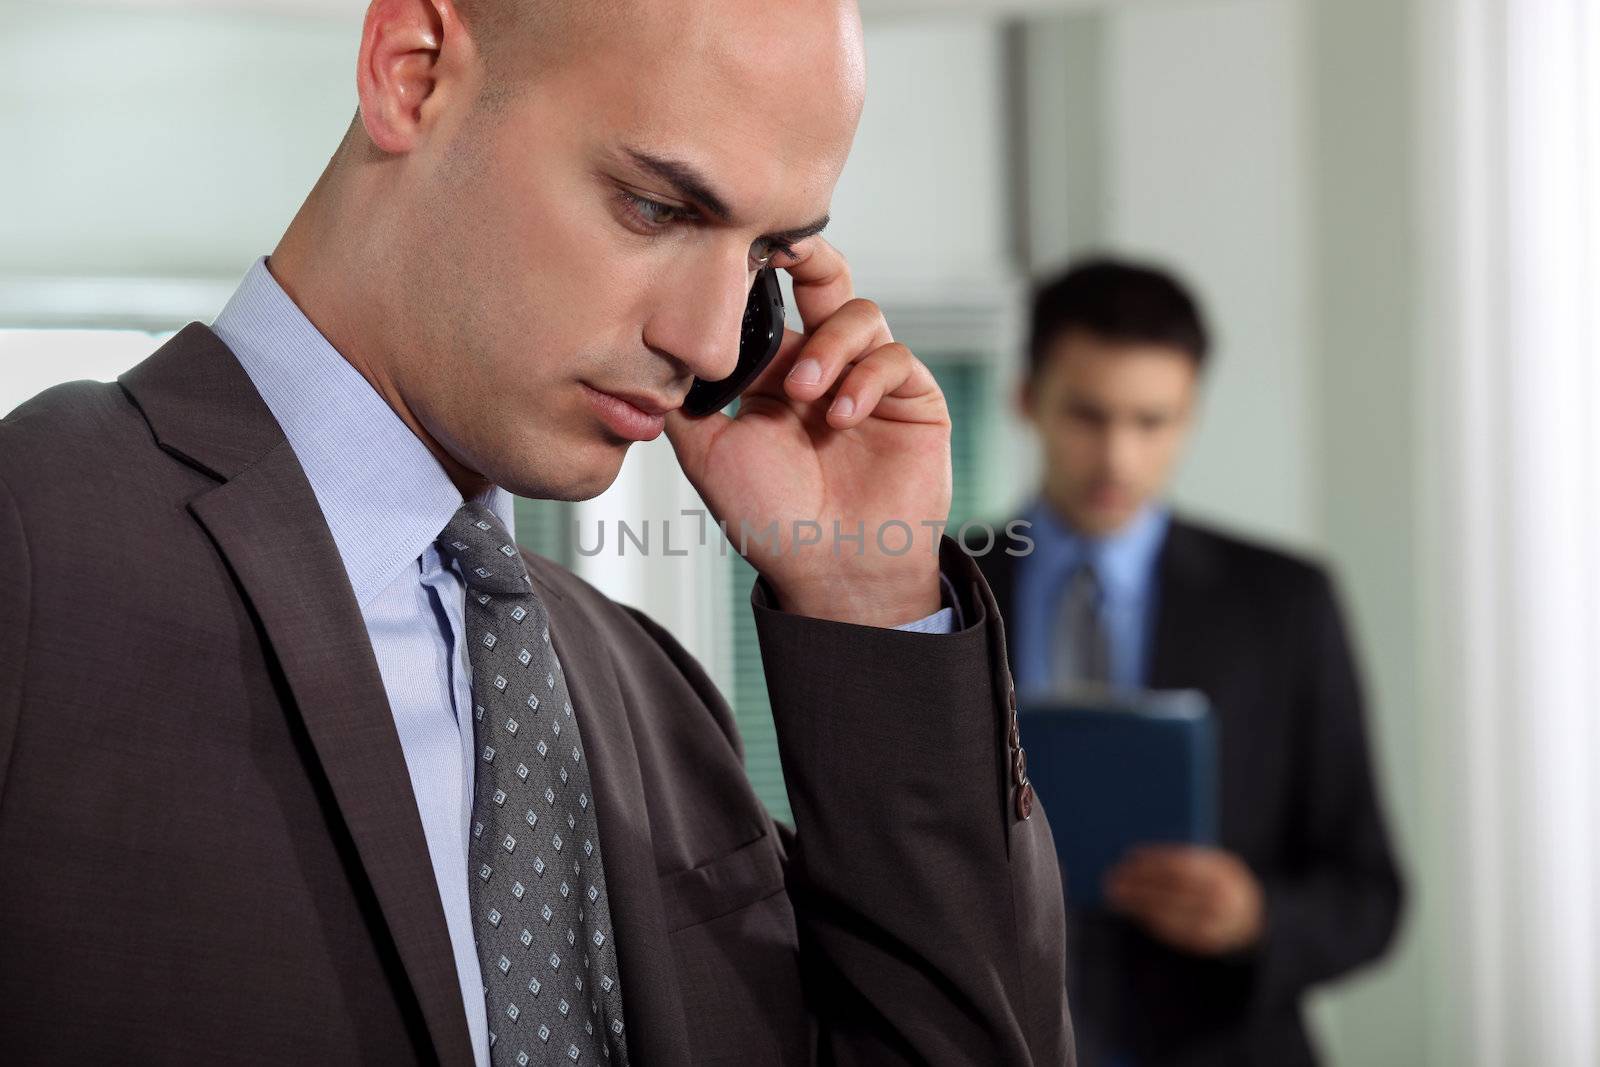 Businessmen negotiating over the phone by phovoir